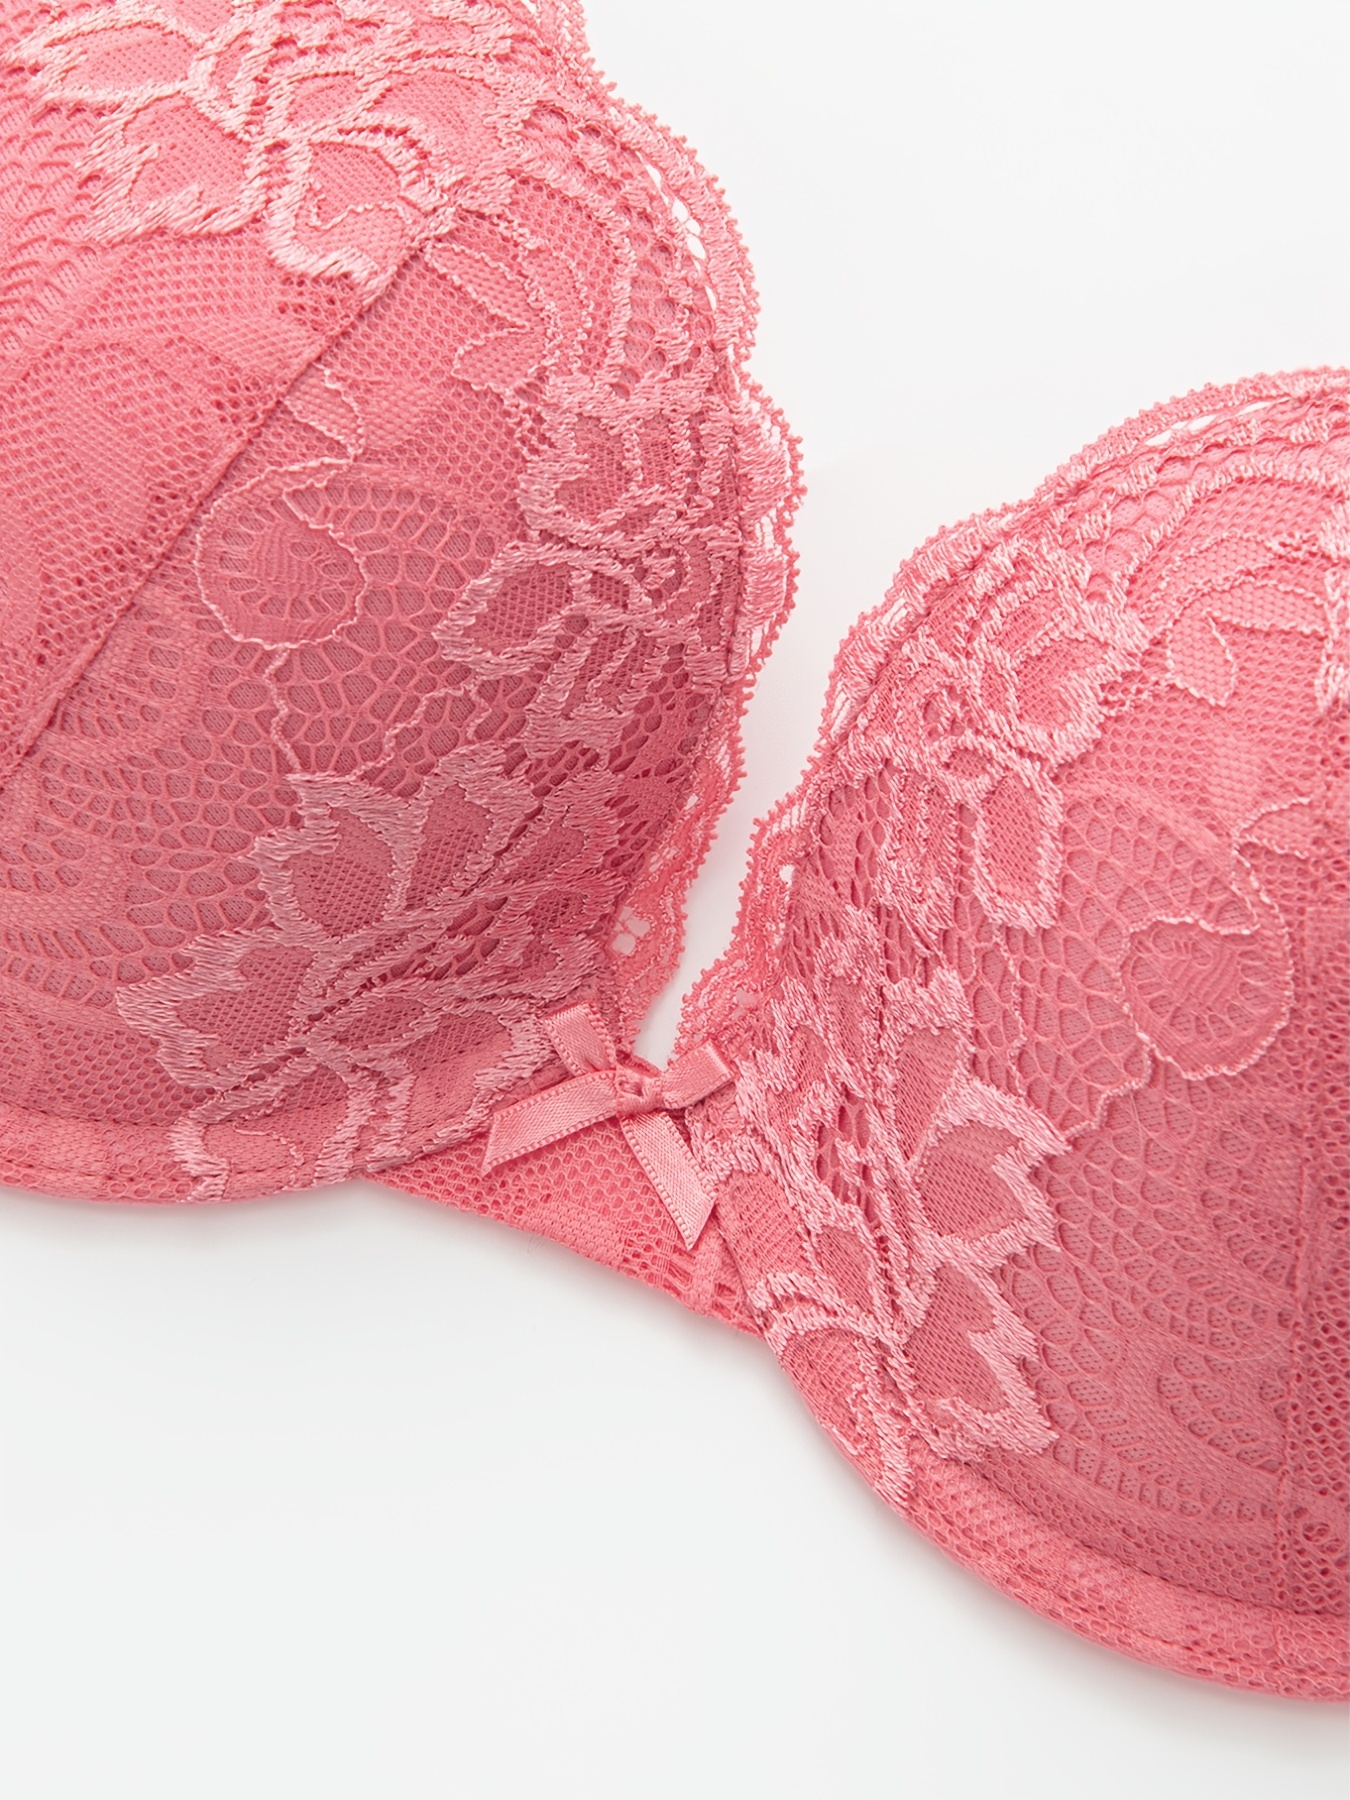 Buy DressBerry Pink Lace Underwired Lightly Padded Everyday Bra